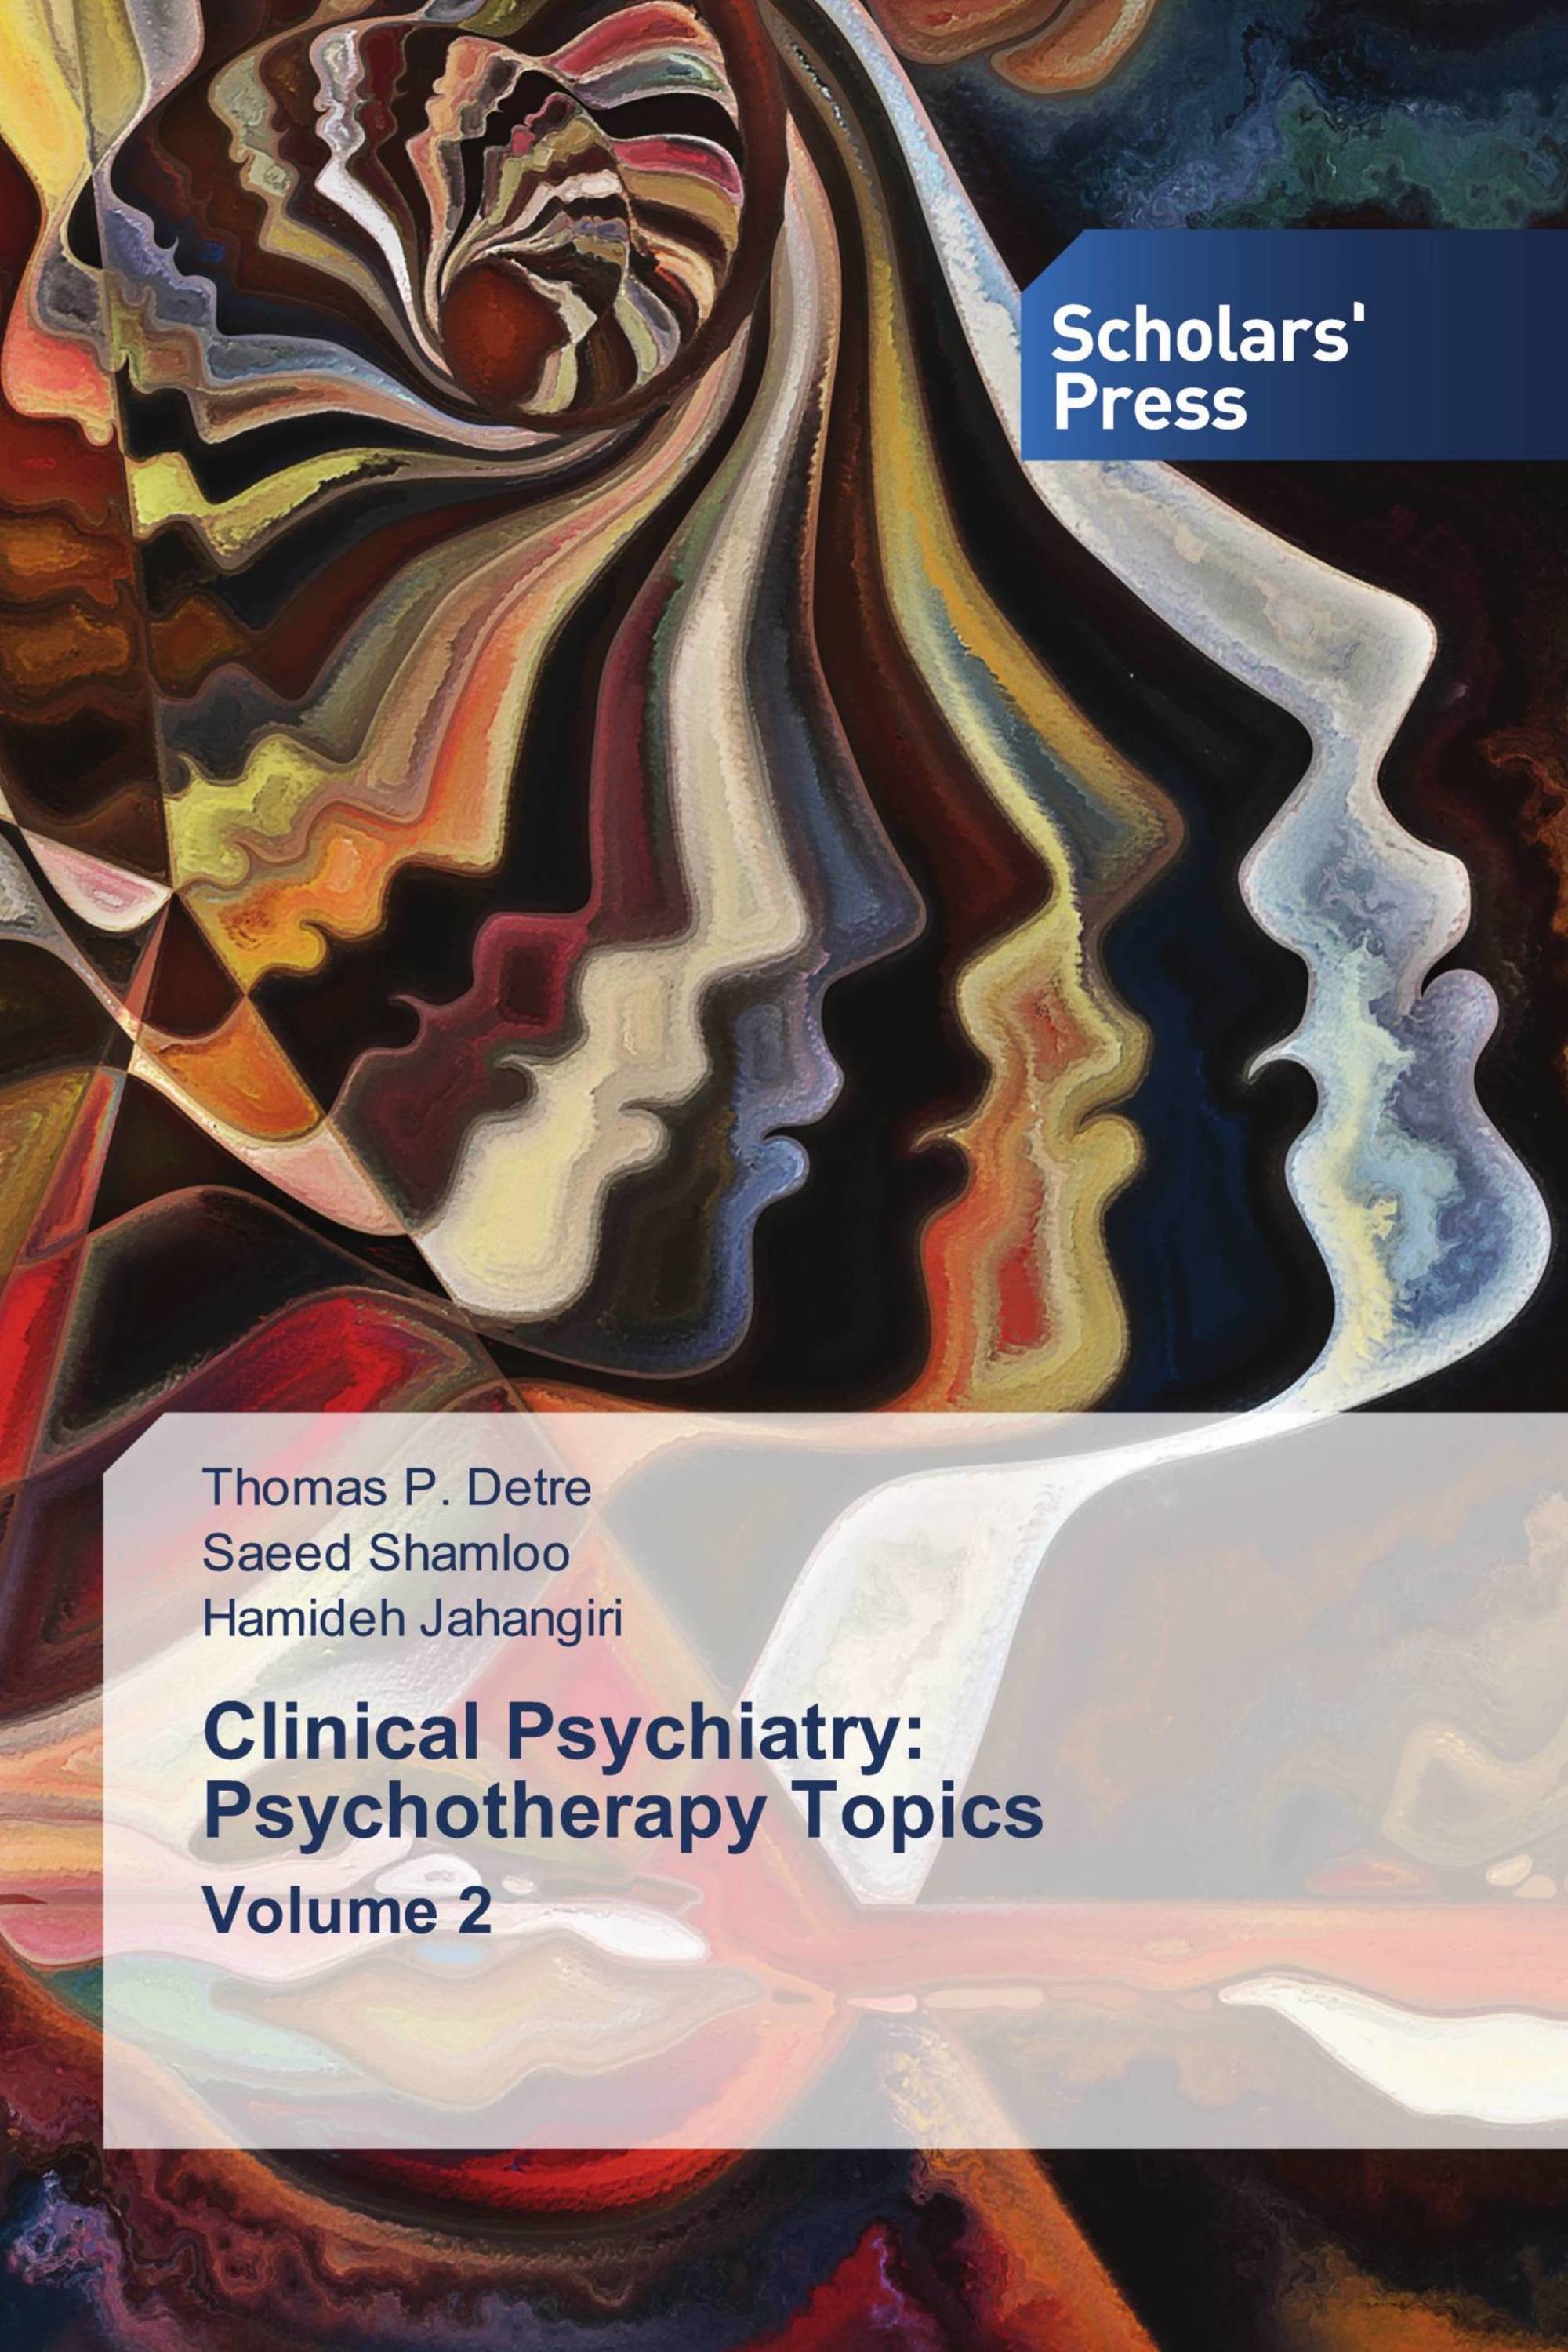 research topics for psychiatry